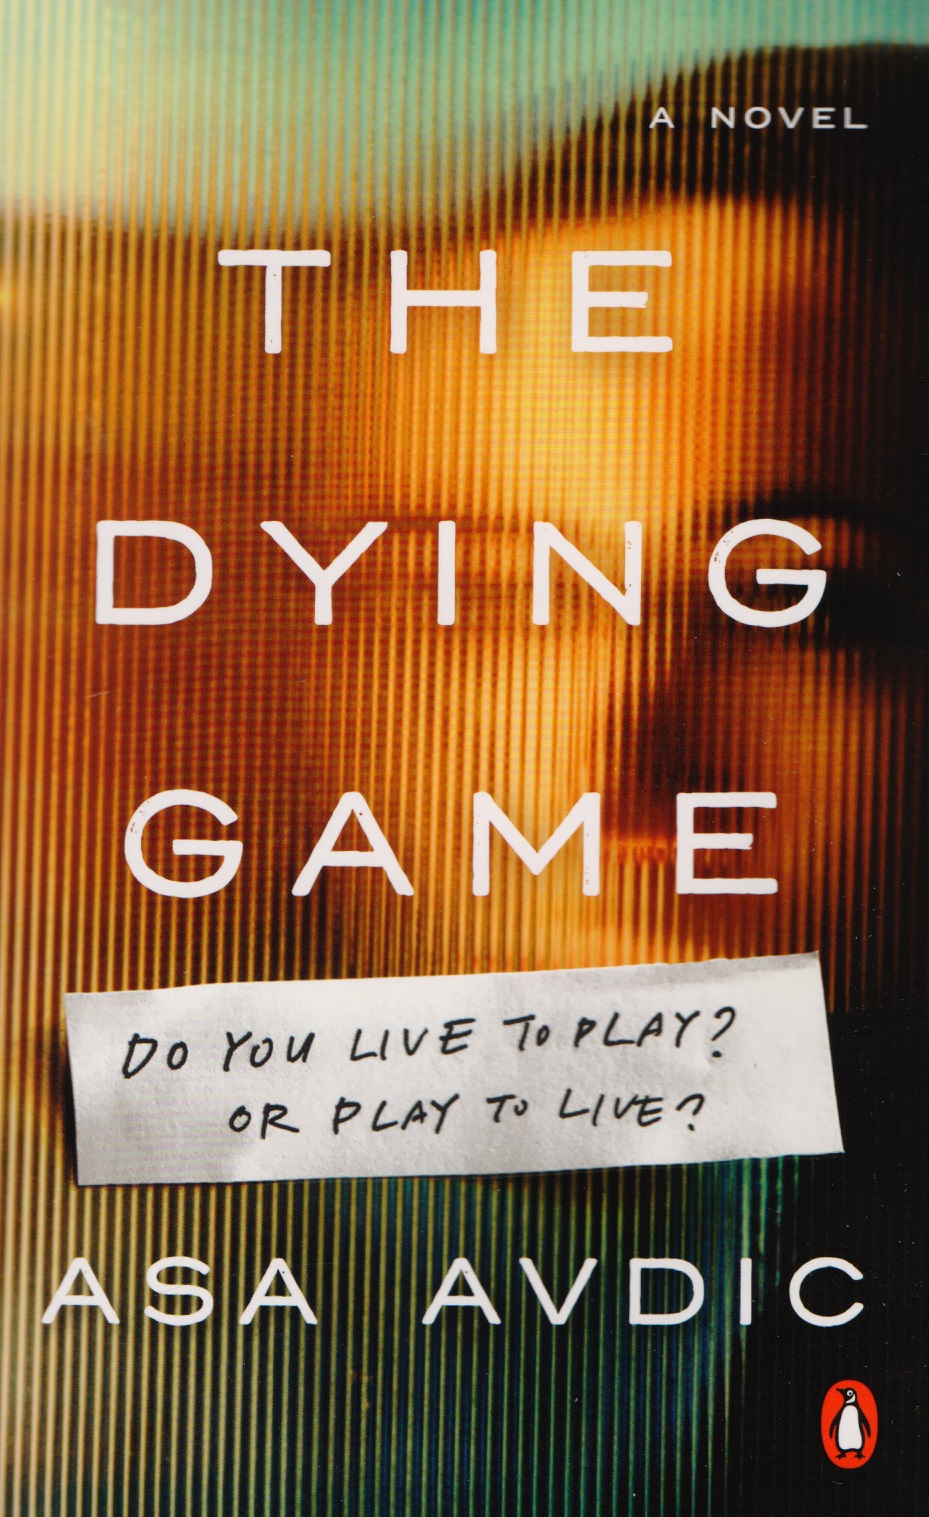 The Dying Game asa avdic the dying game